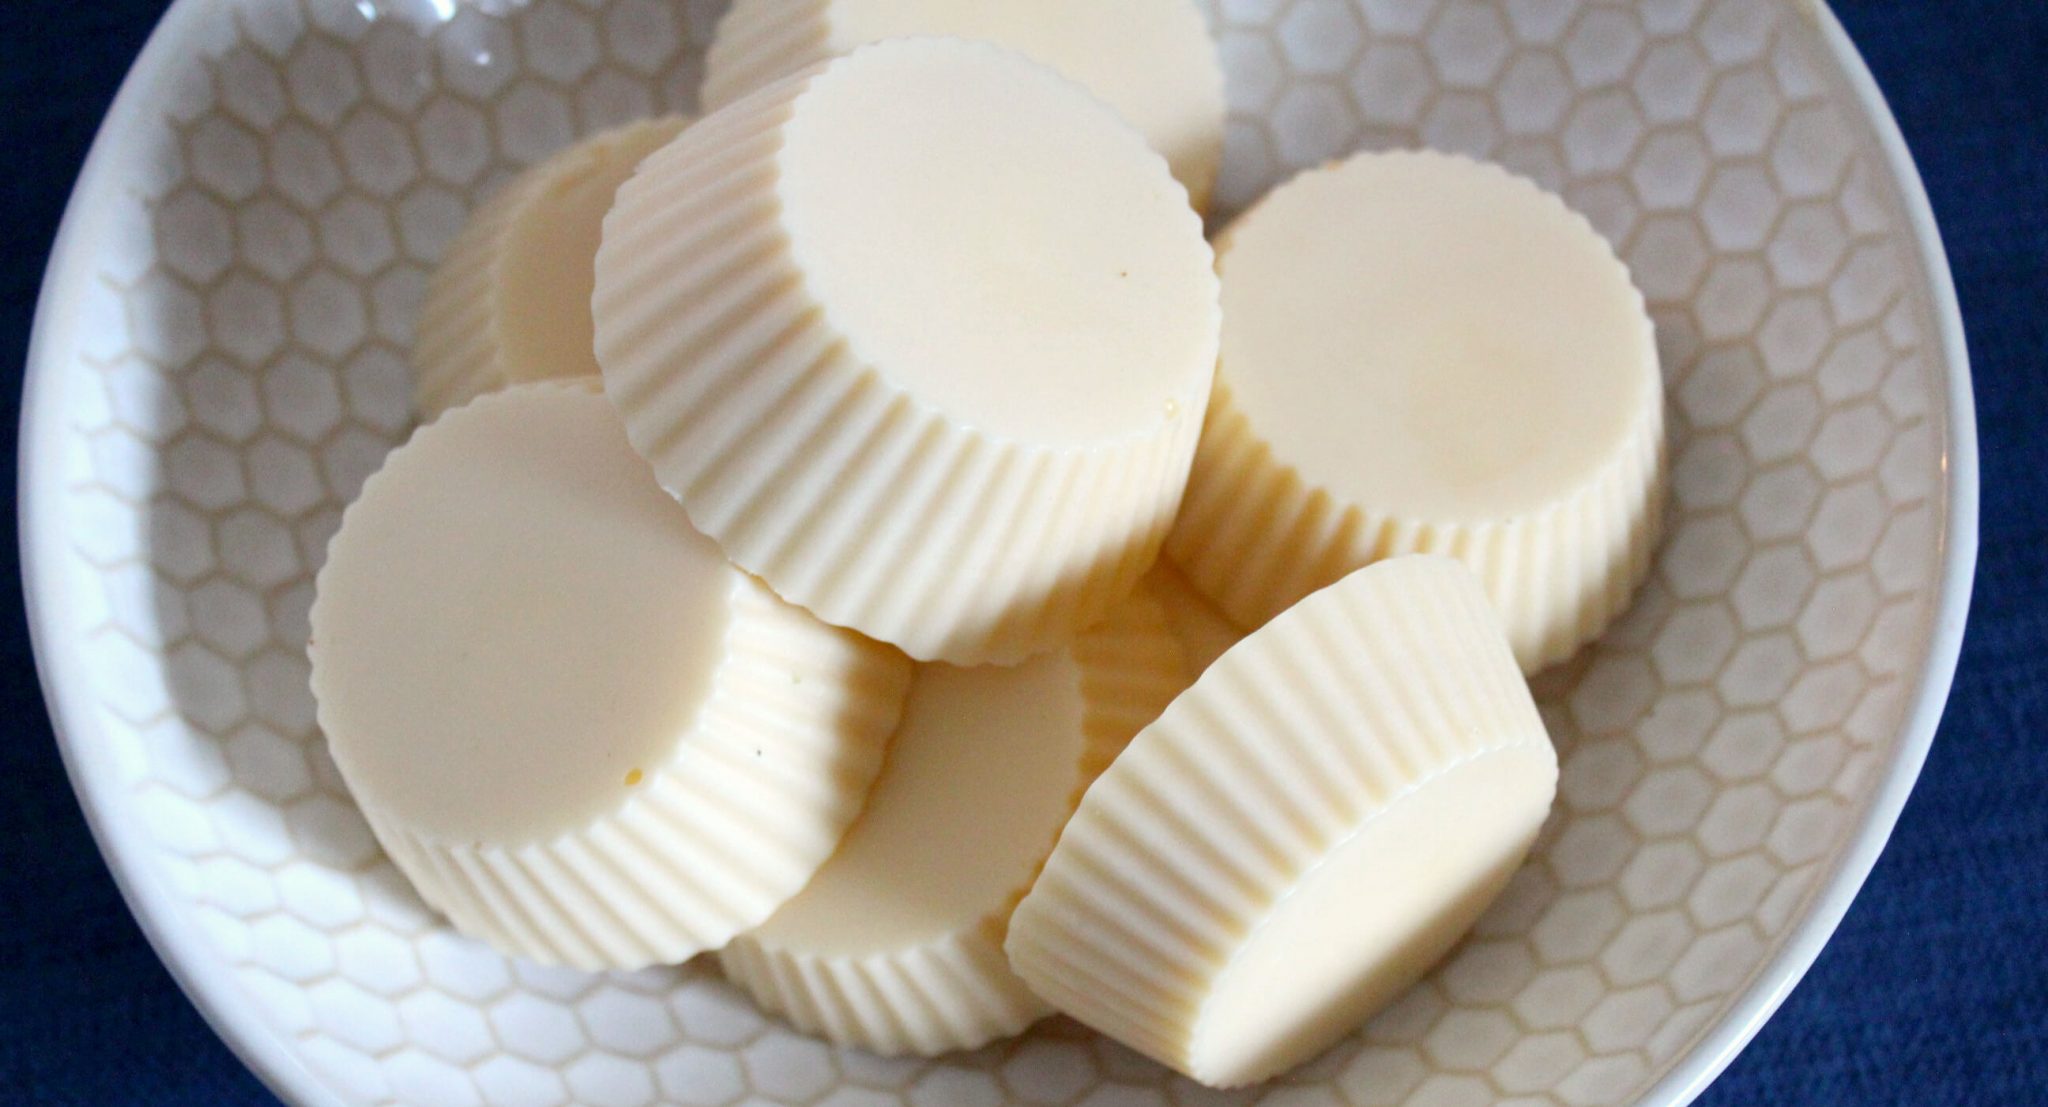 Homemade Lotion Bars made with Beeswax and Shea Butter